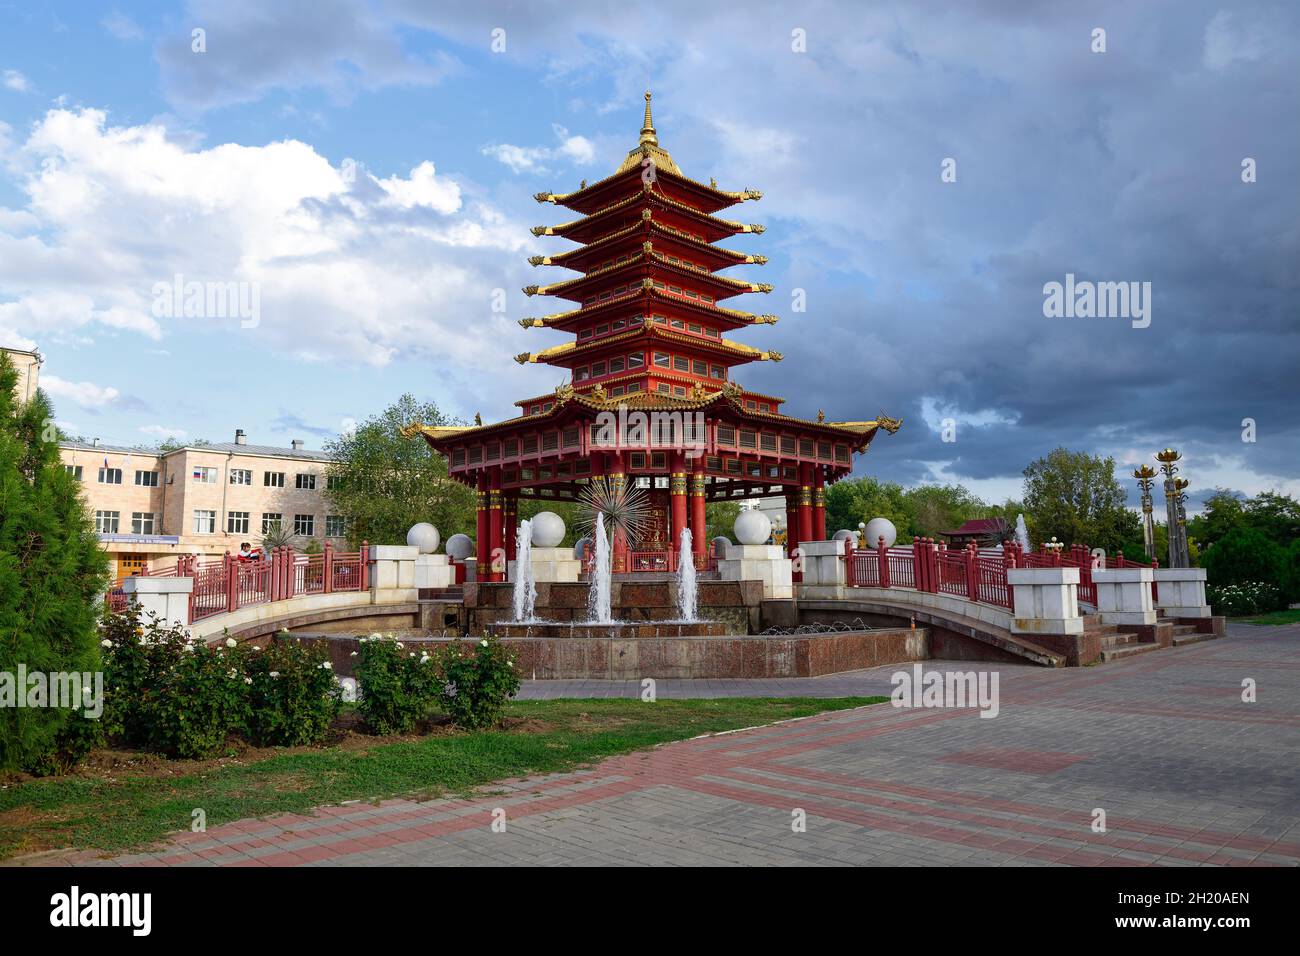 ELISTA, RUSSIA - SEPTEMBER 20, 2021: Buddhist Pagoda 'Seven Days' on Lenin Square on a cloudy September day Stock Photo